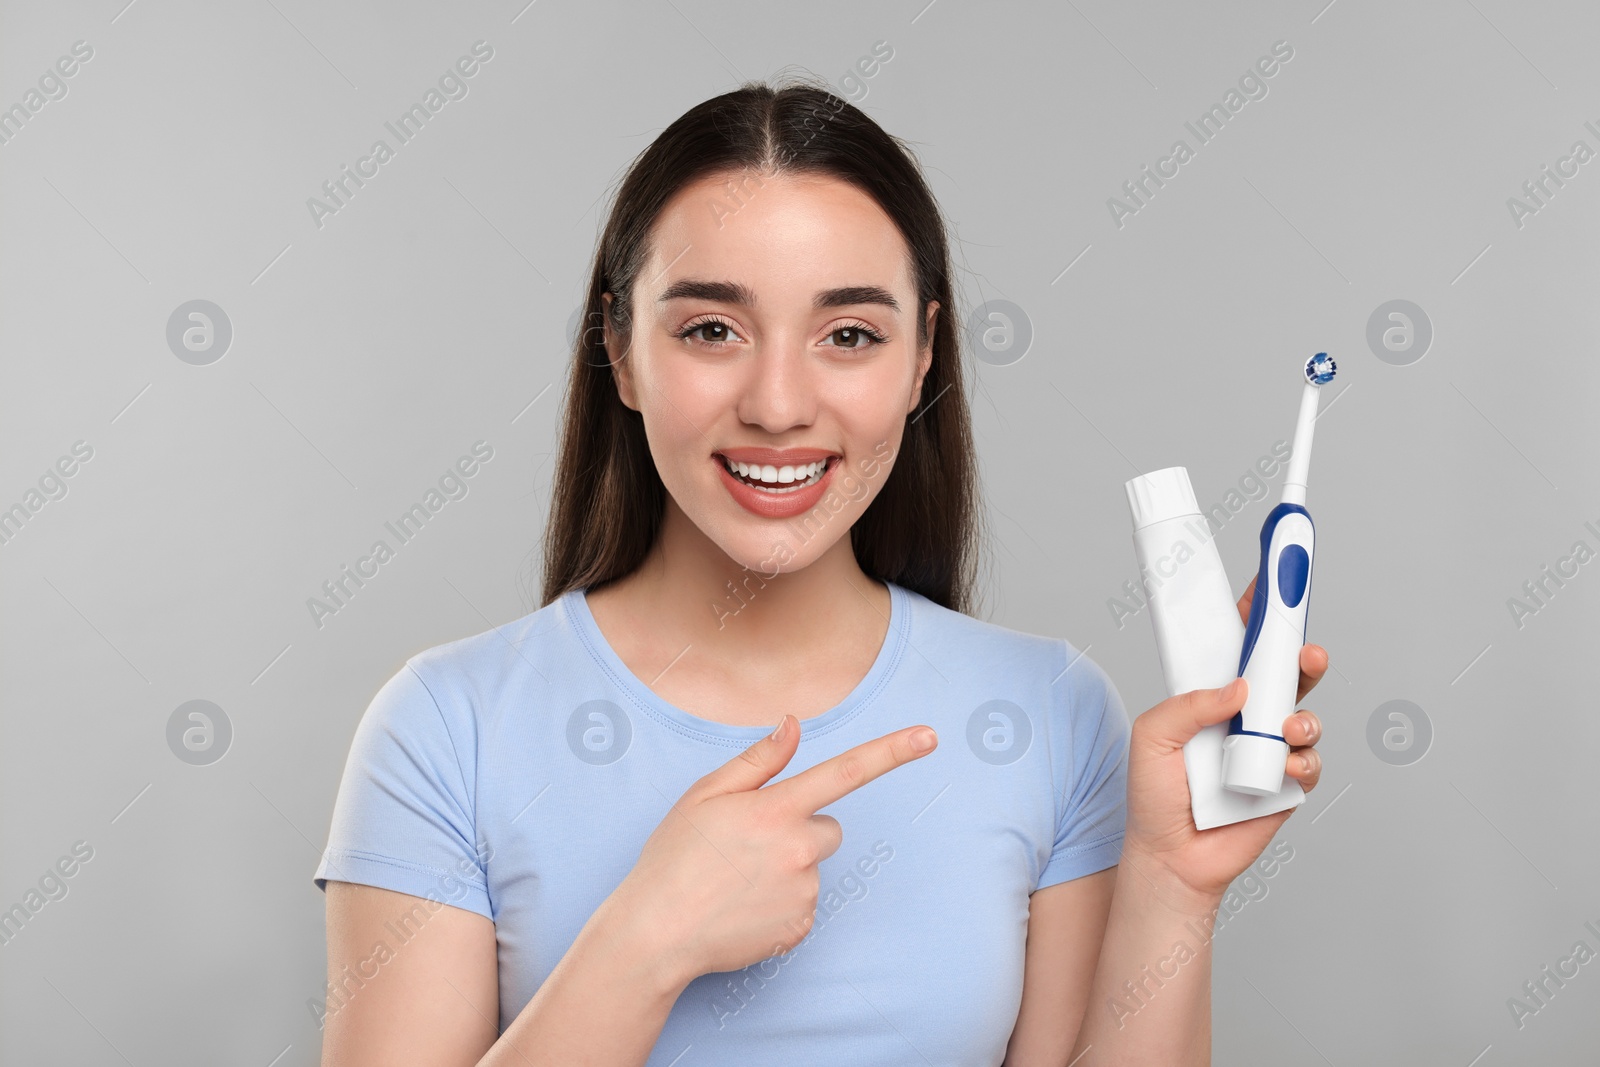 Photo of Happy young woman holding electric toothbrush and tube of toothpaste on light grey background